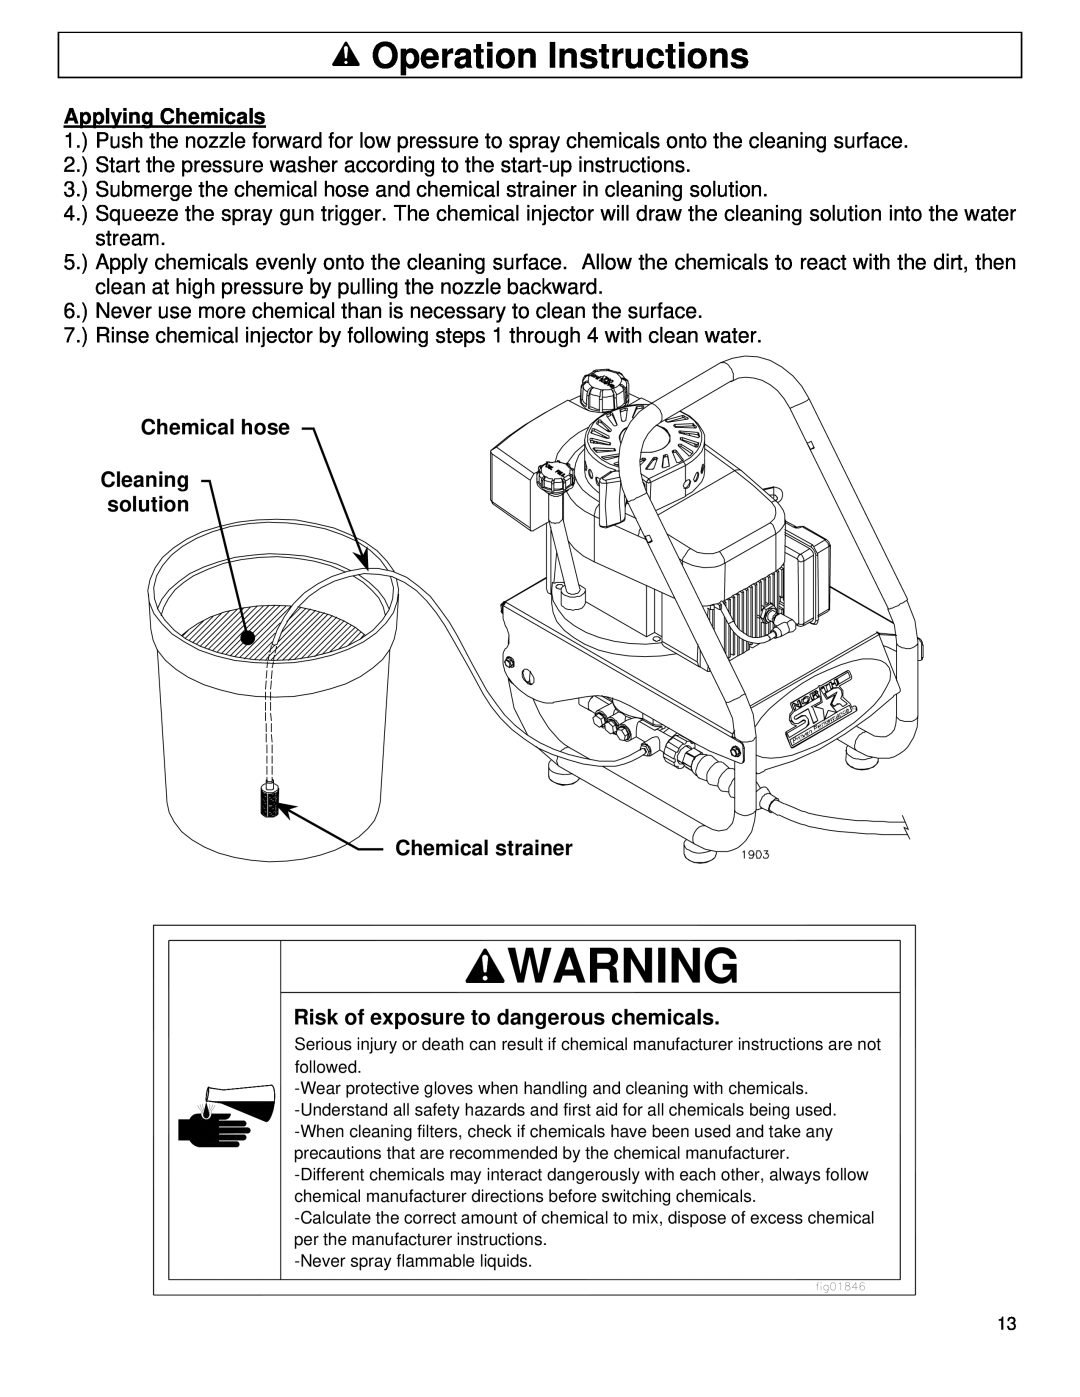 North Star M157477A Operation Instructions, Applying Chemicals, Chemical hose Cleaning solution Chemical strainer 